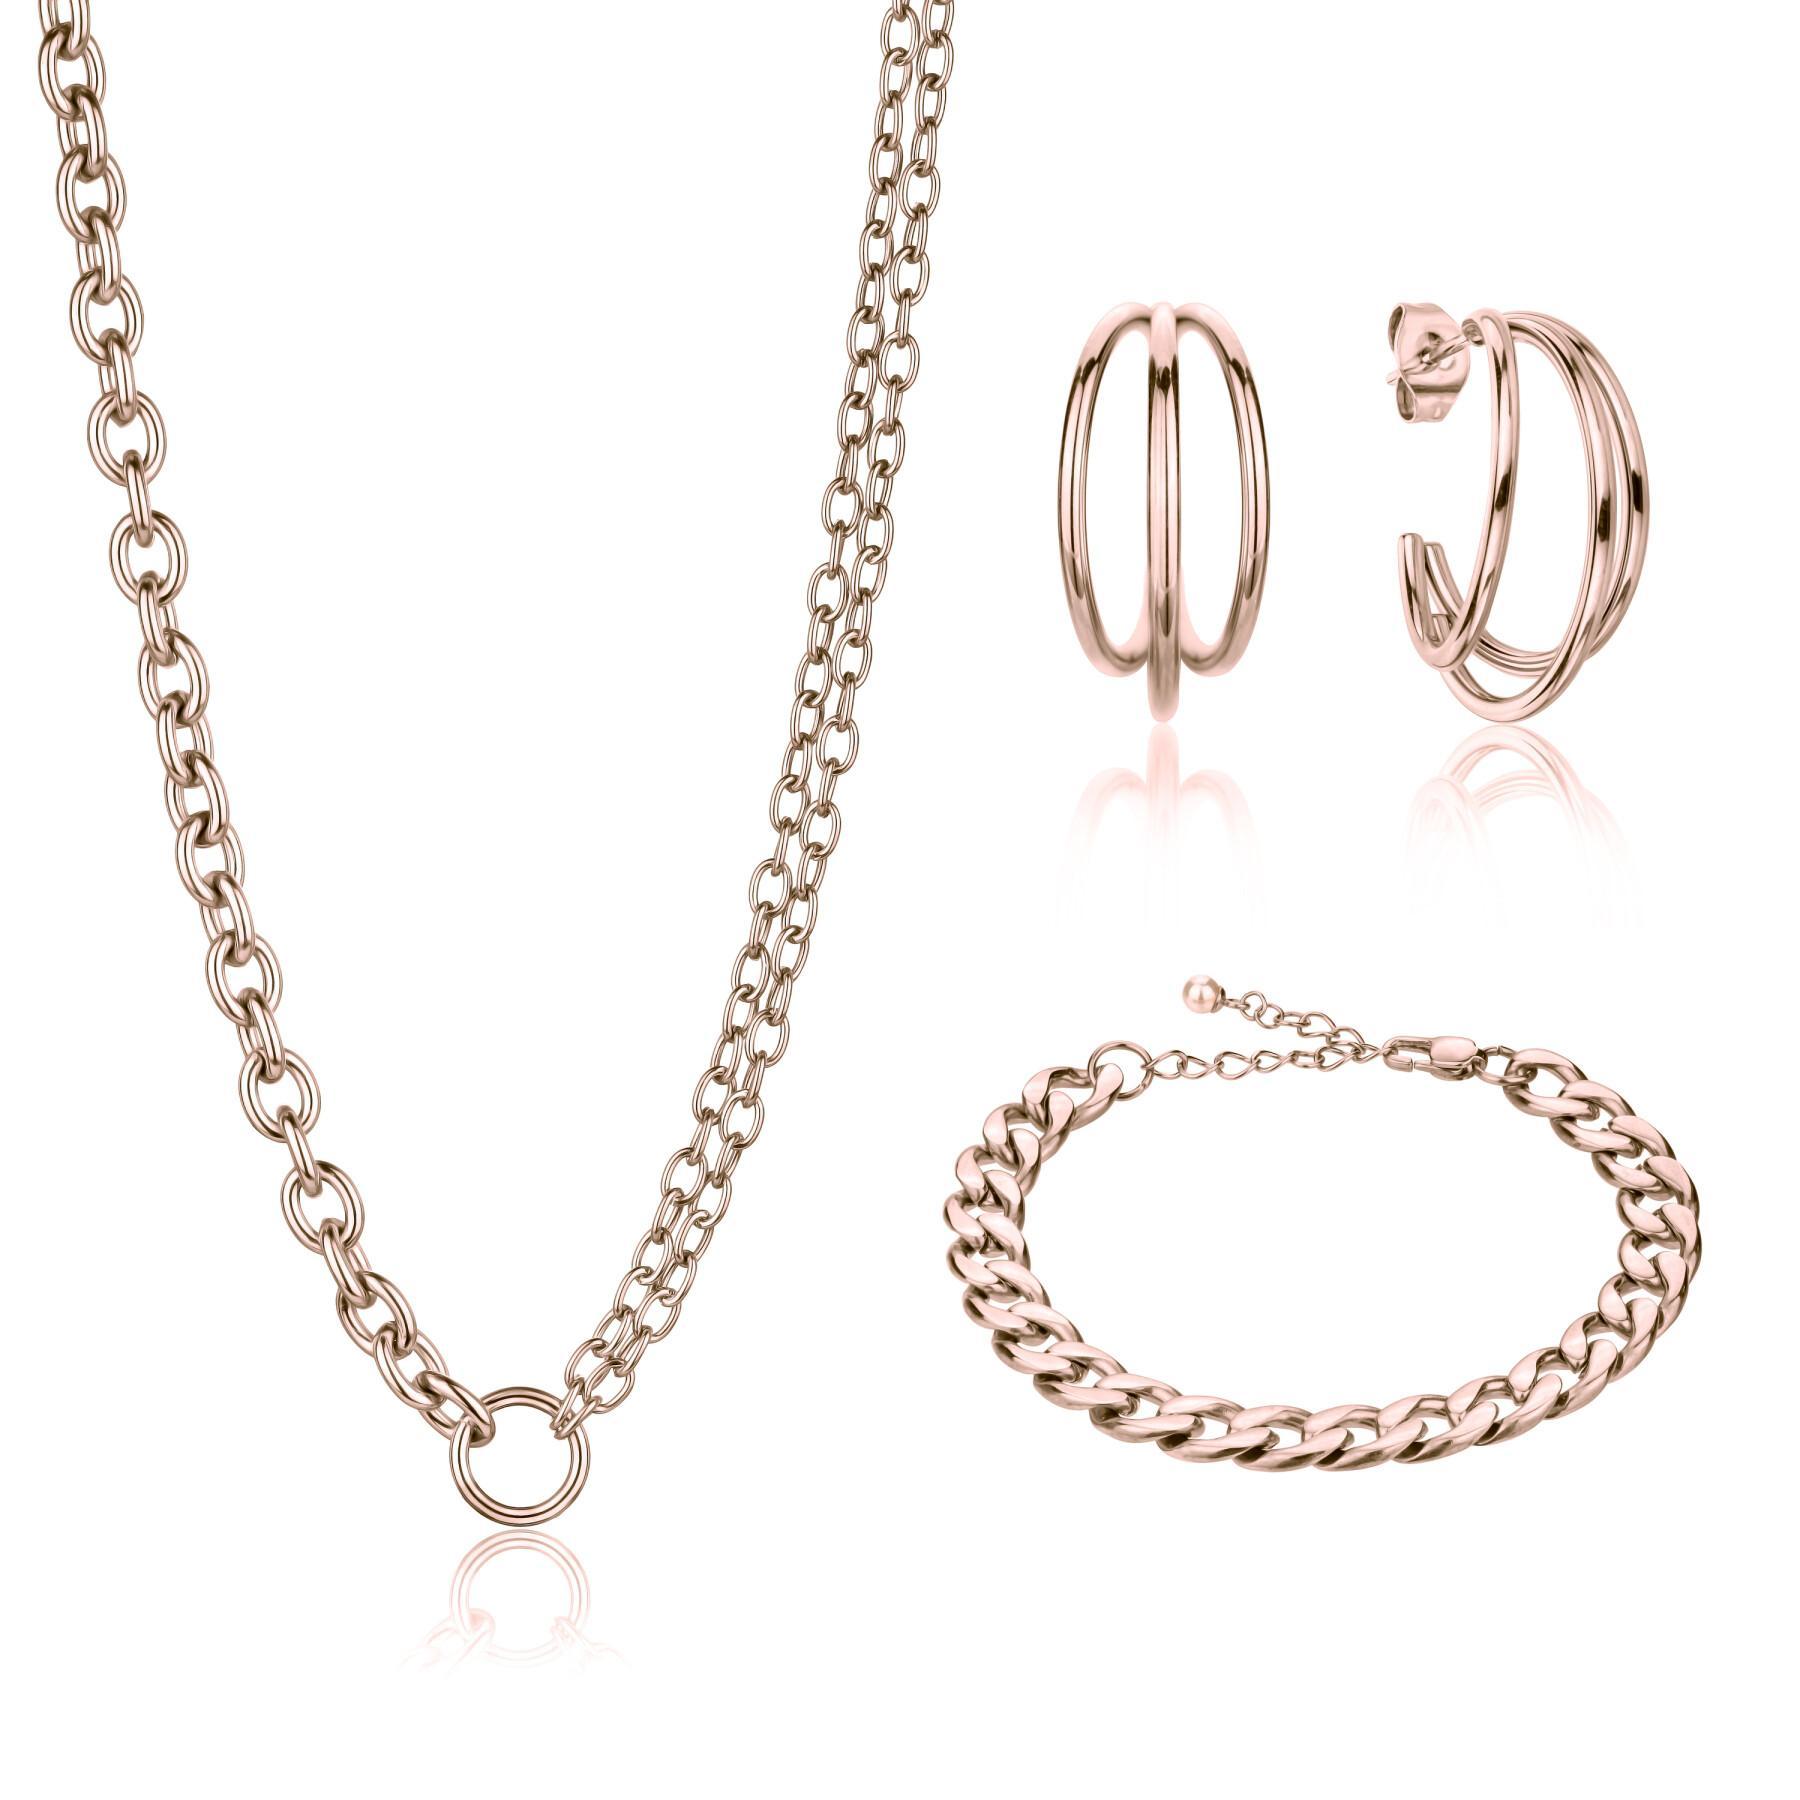 Necklace, bracelet and earrings set Isabella Ford Chelou